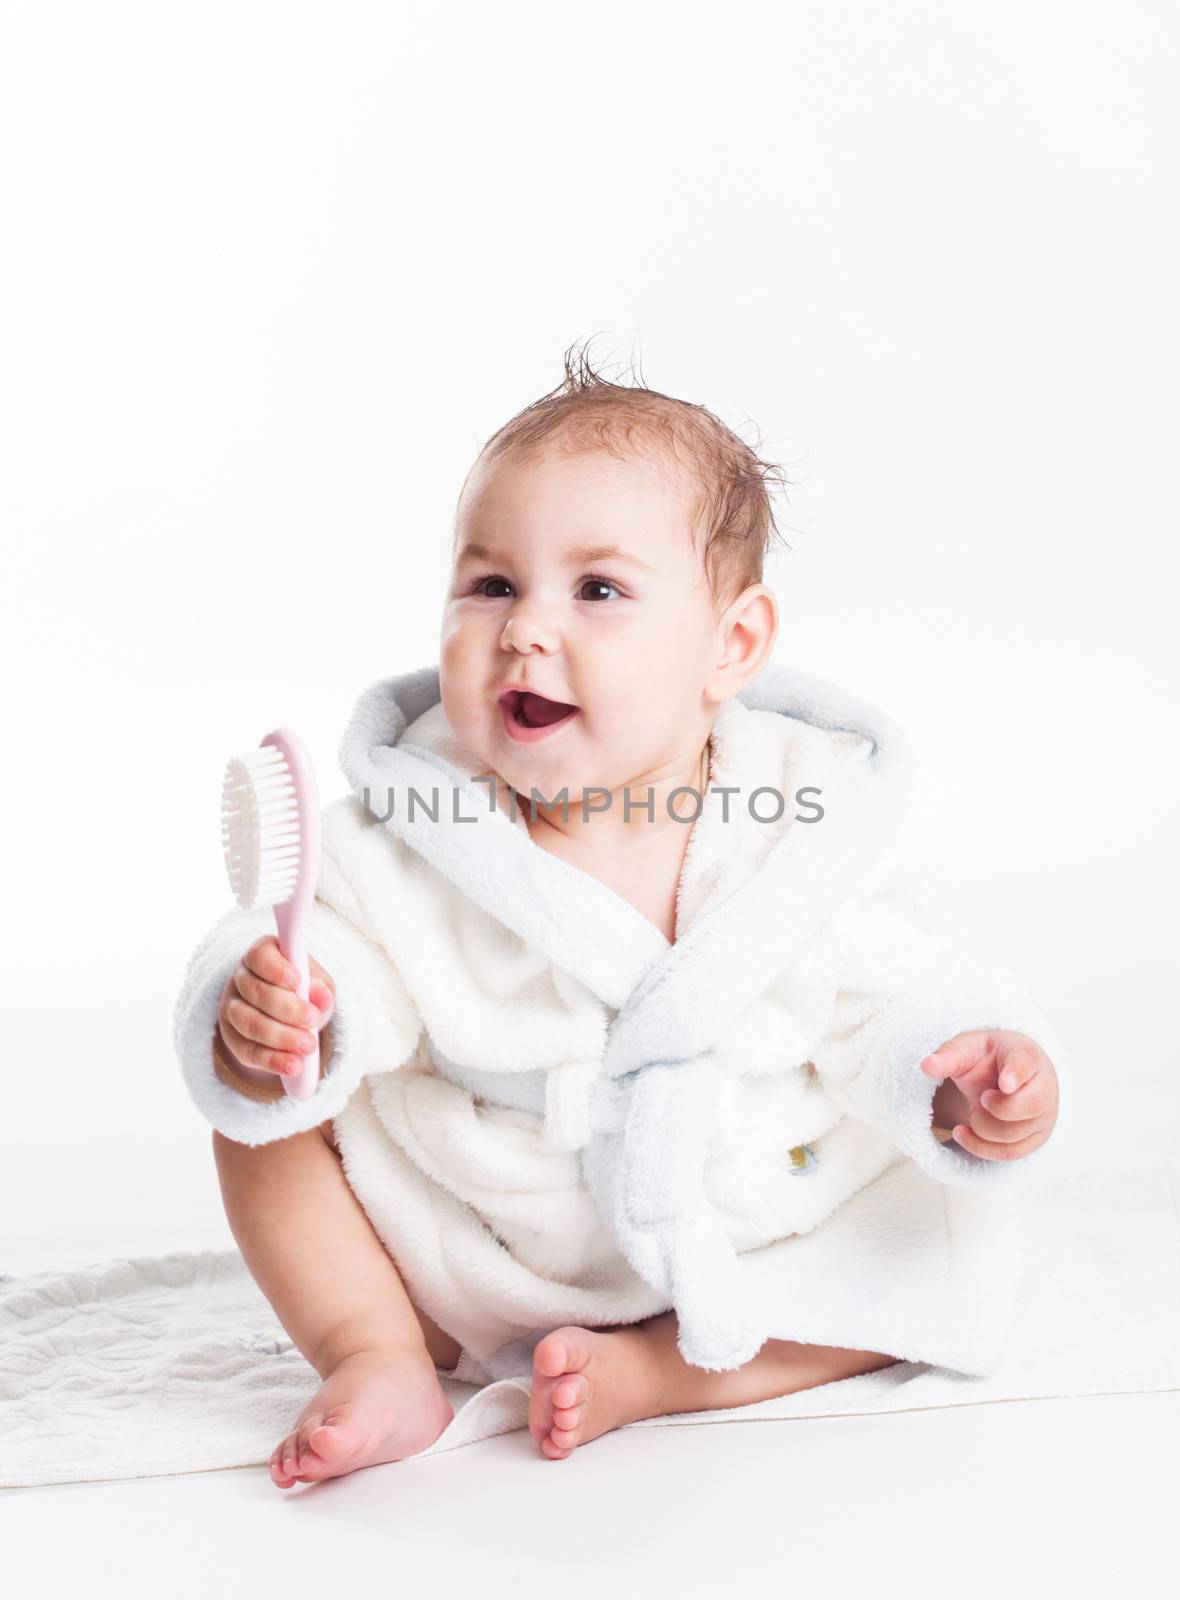 Baby after bath with comb and wet head